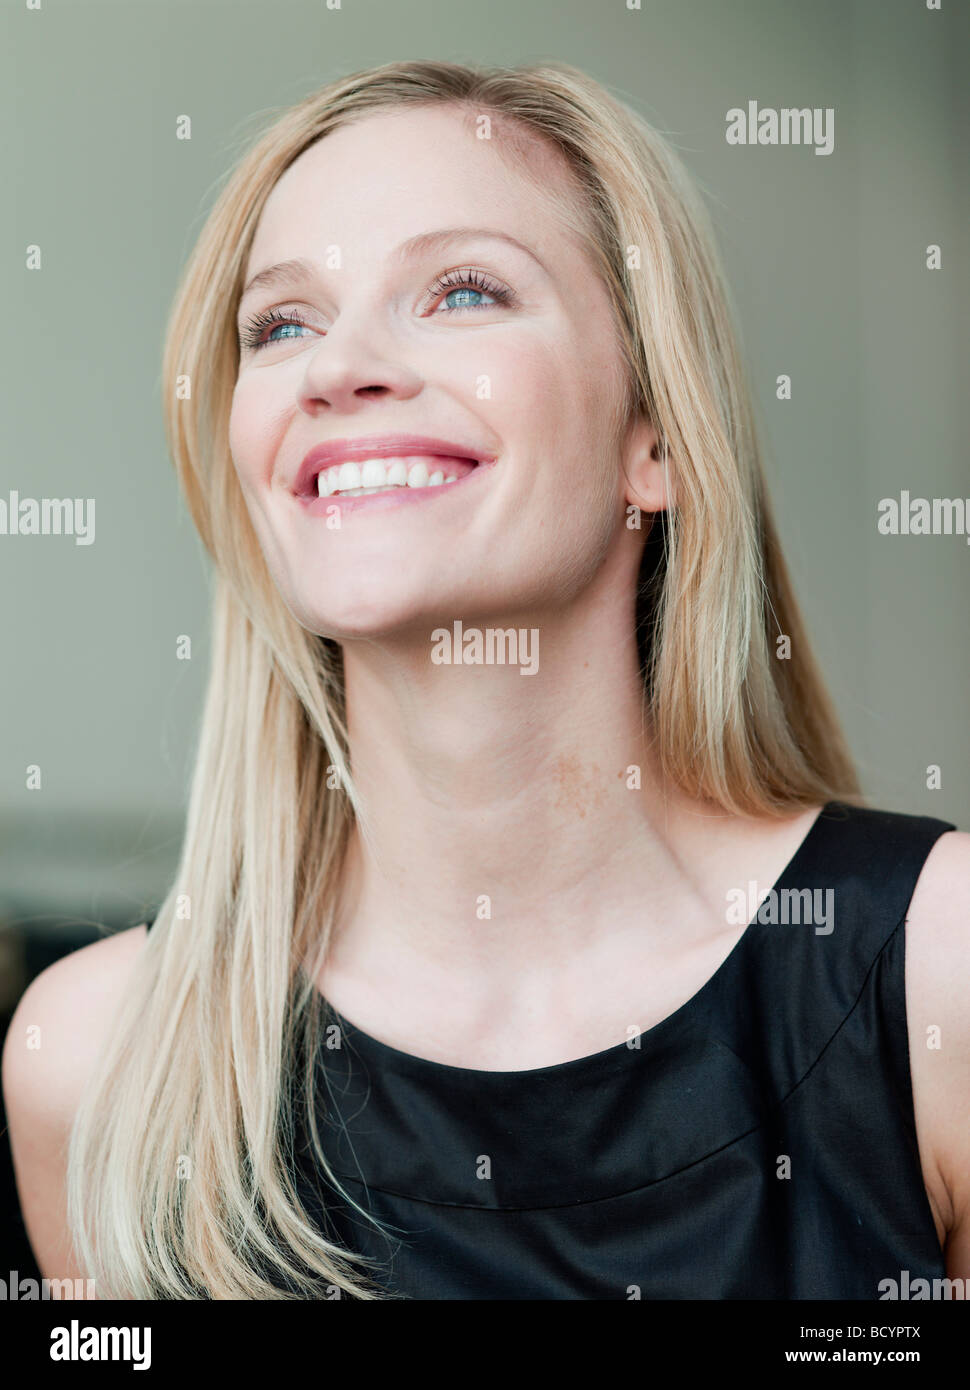 woman looking up Stock Photo